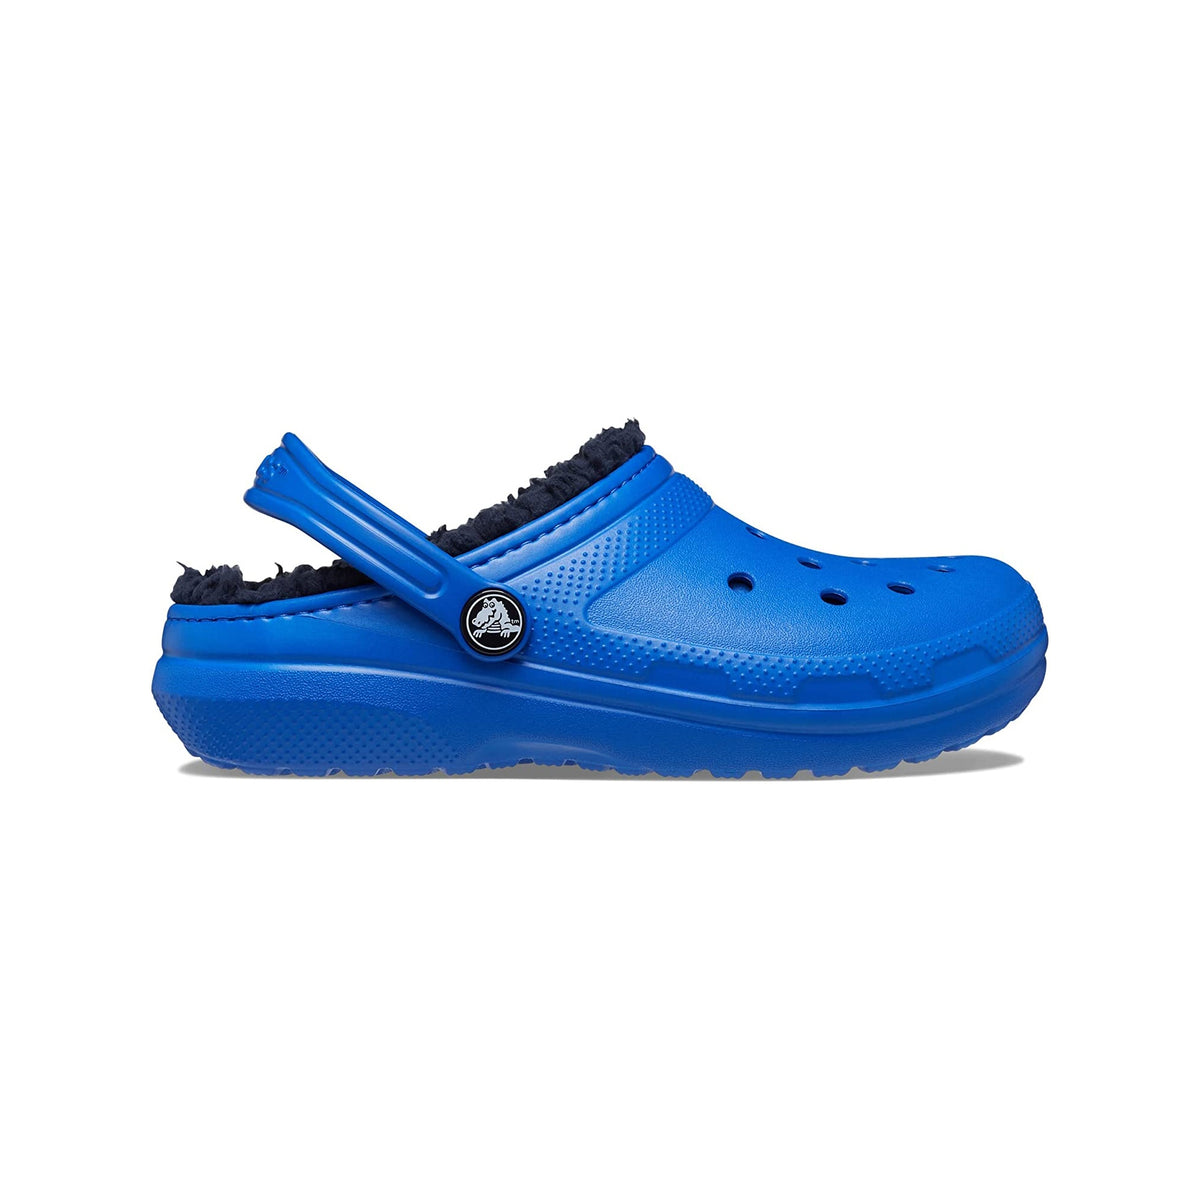 Side view of Crocs Kids Classic Lined Clog in Blue Bolt